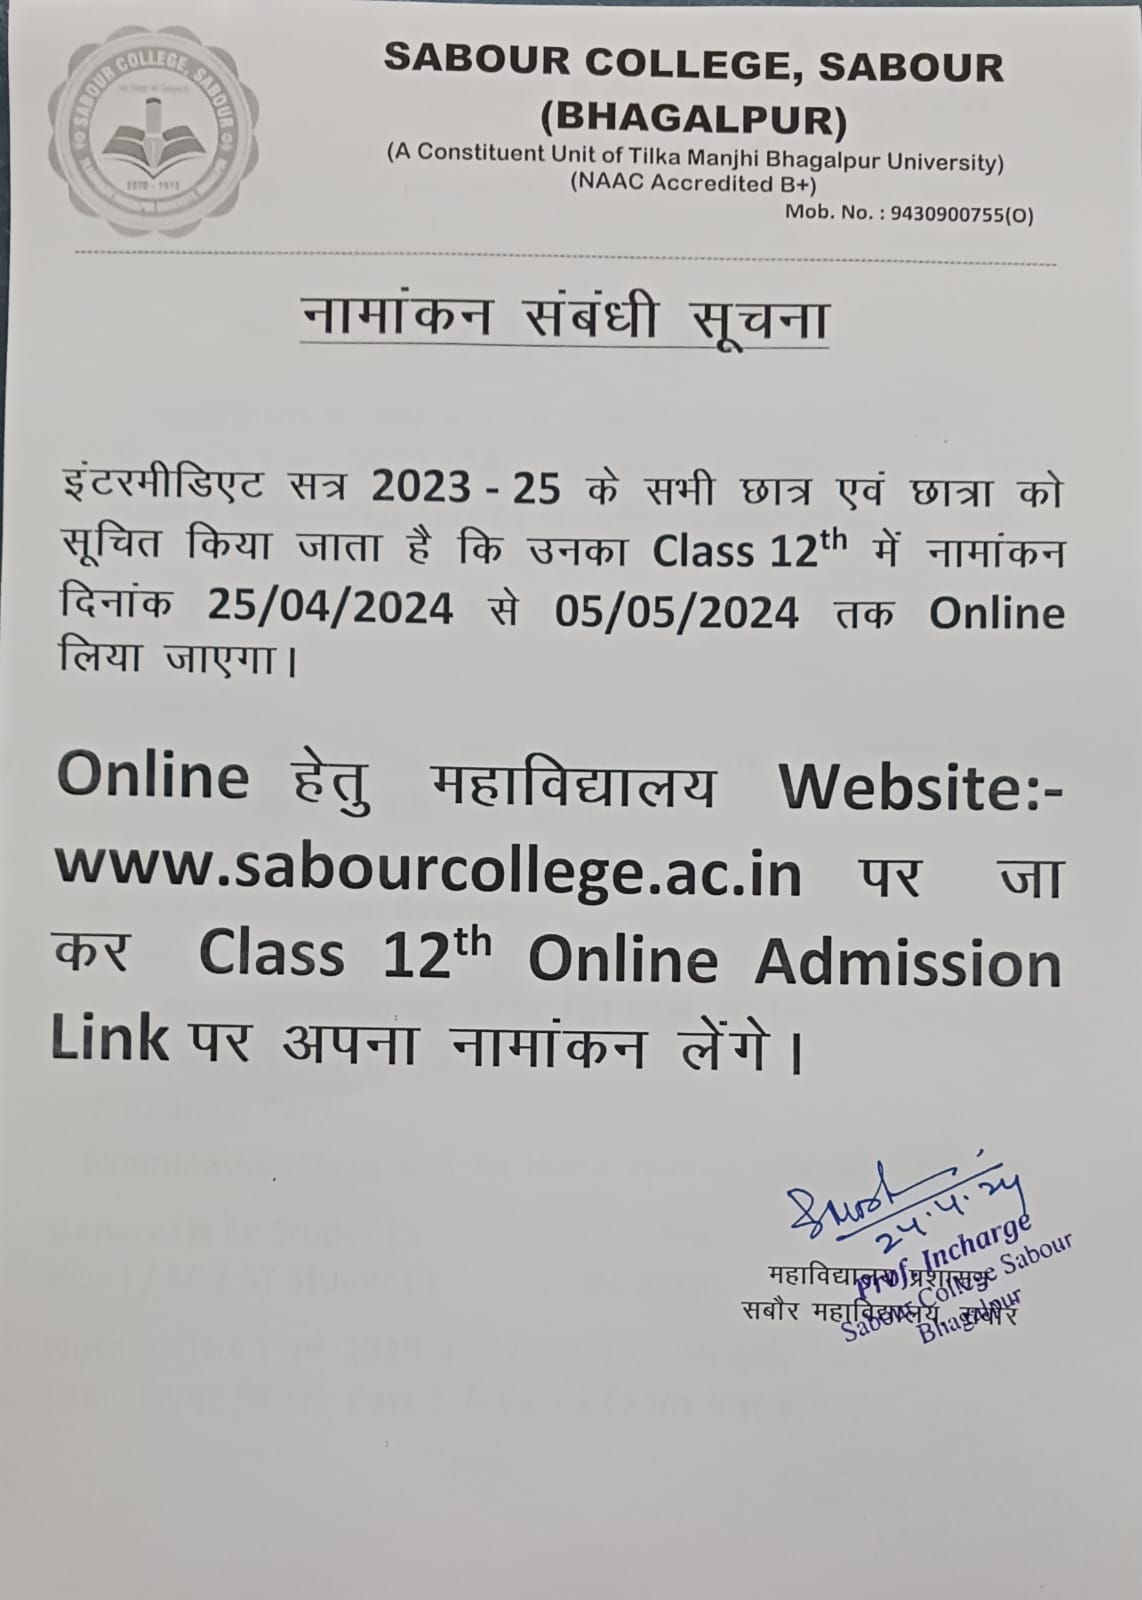 Notice for online Fee payment for class 12th